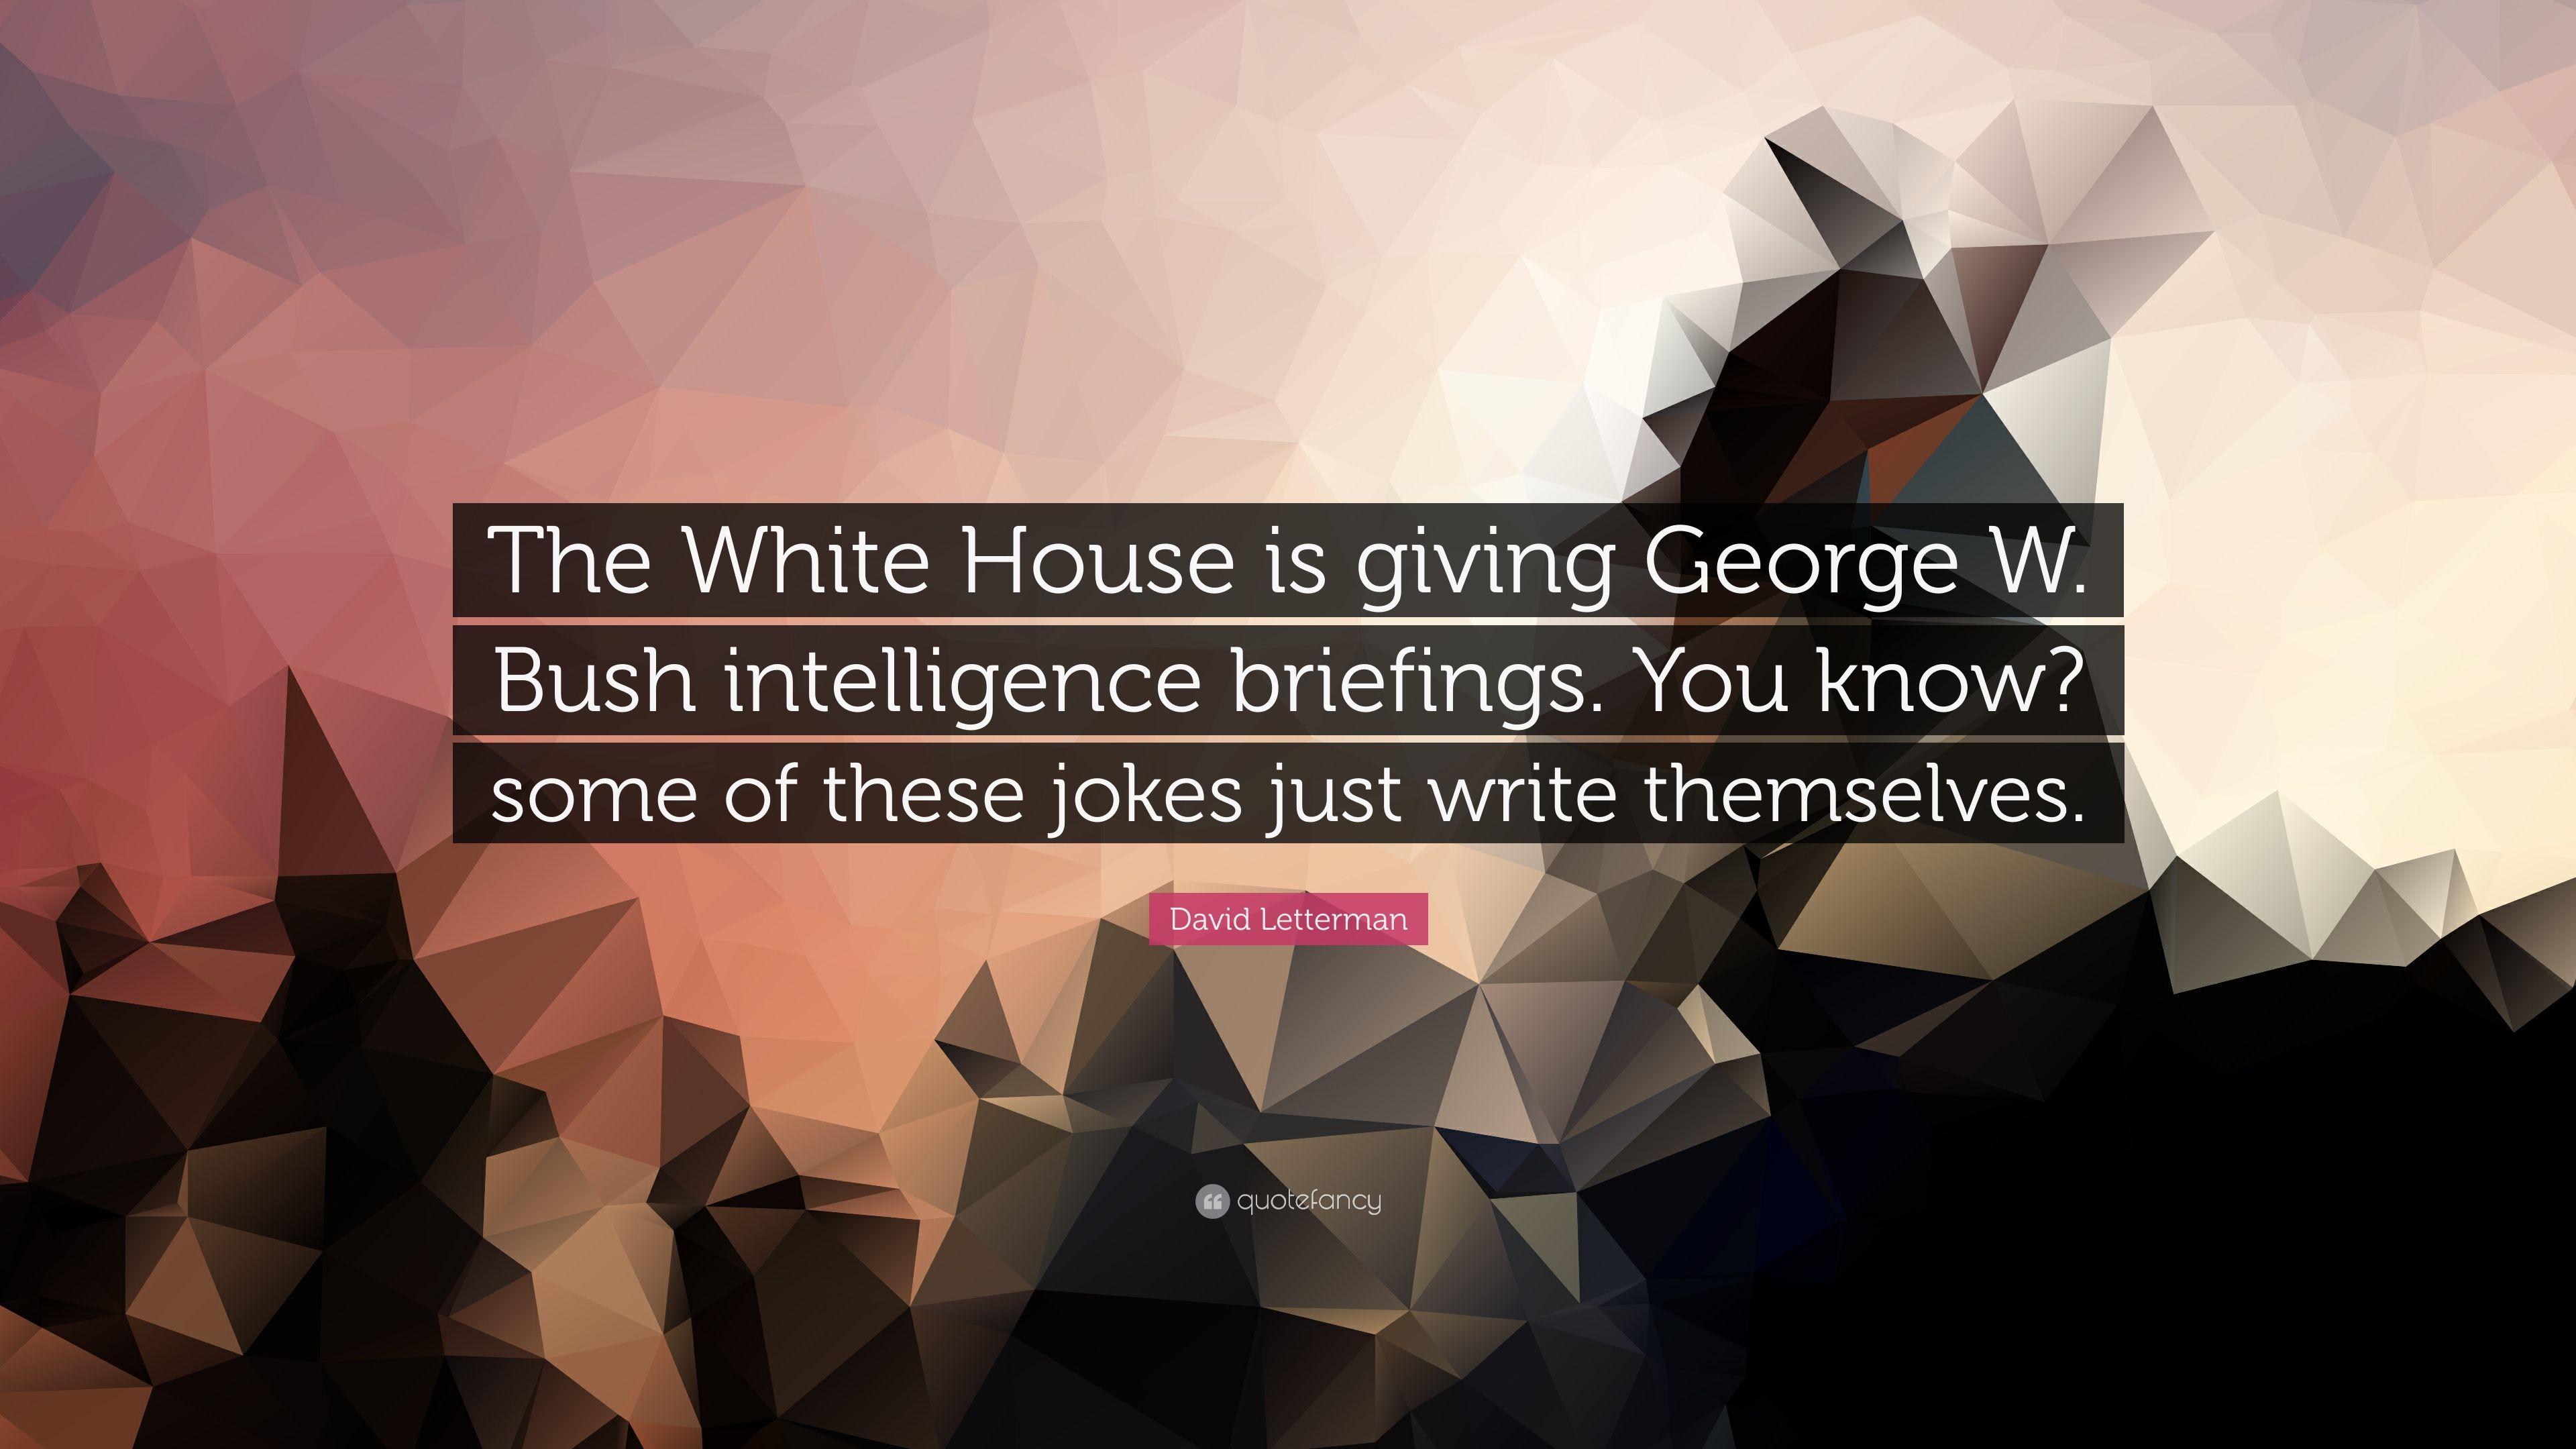 David Letterman Quote: “The White House is giving George W. Bush